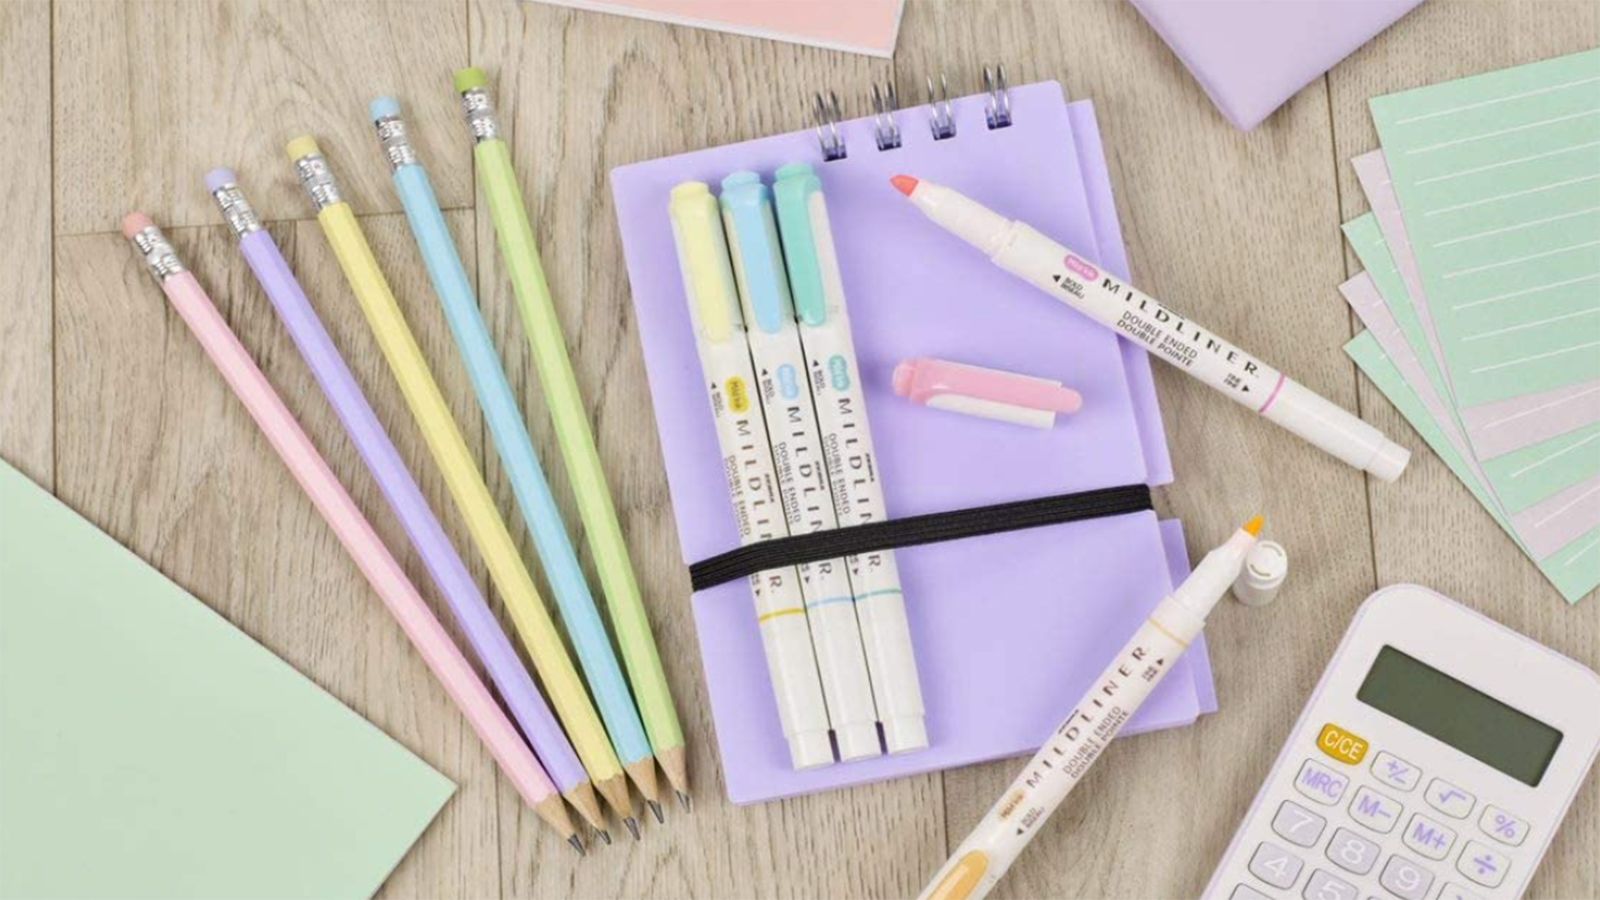 Wednesday Stationery Set for Girls Teenagers Women and Pen Set - A5 Journal and Ballpoint Pen Stationery Supplies - Gifts for Her